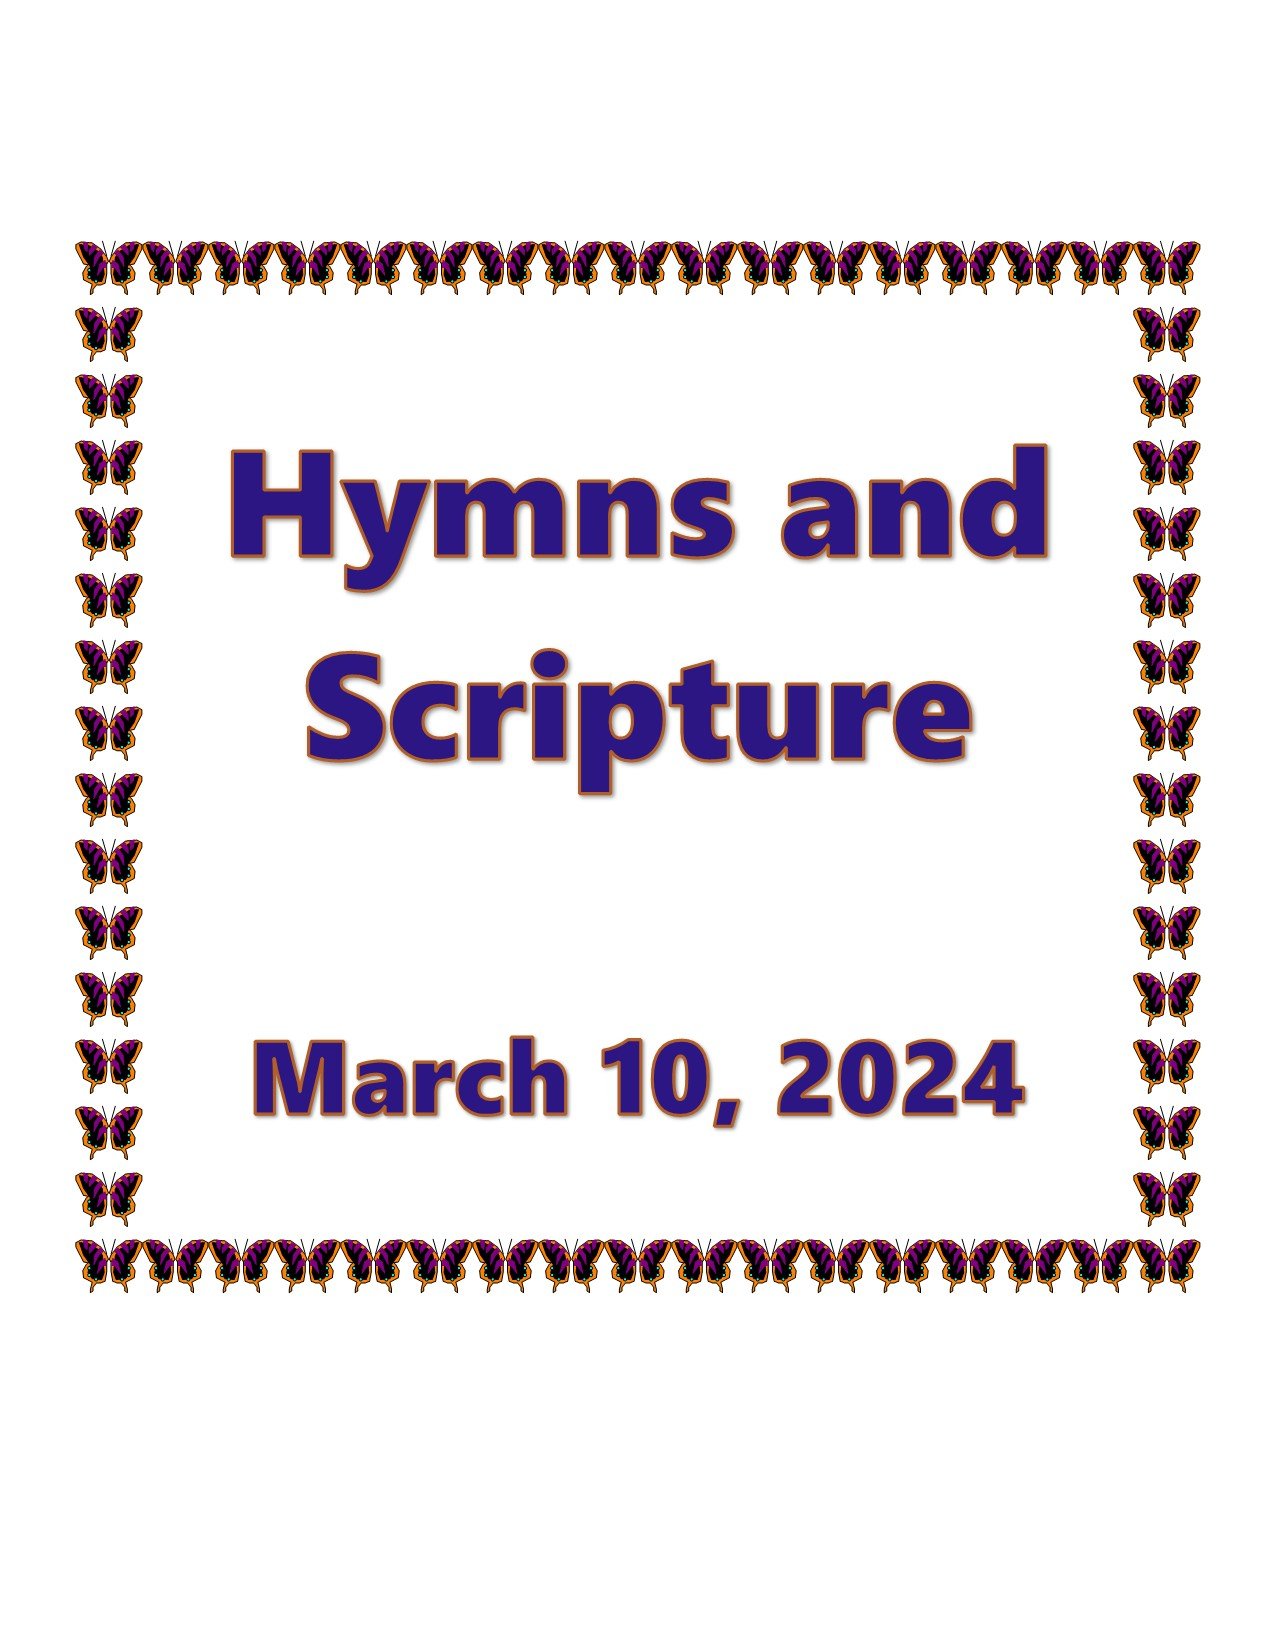 a Button - Hymns and Scripture Feb 42024.jpg